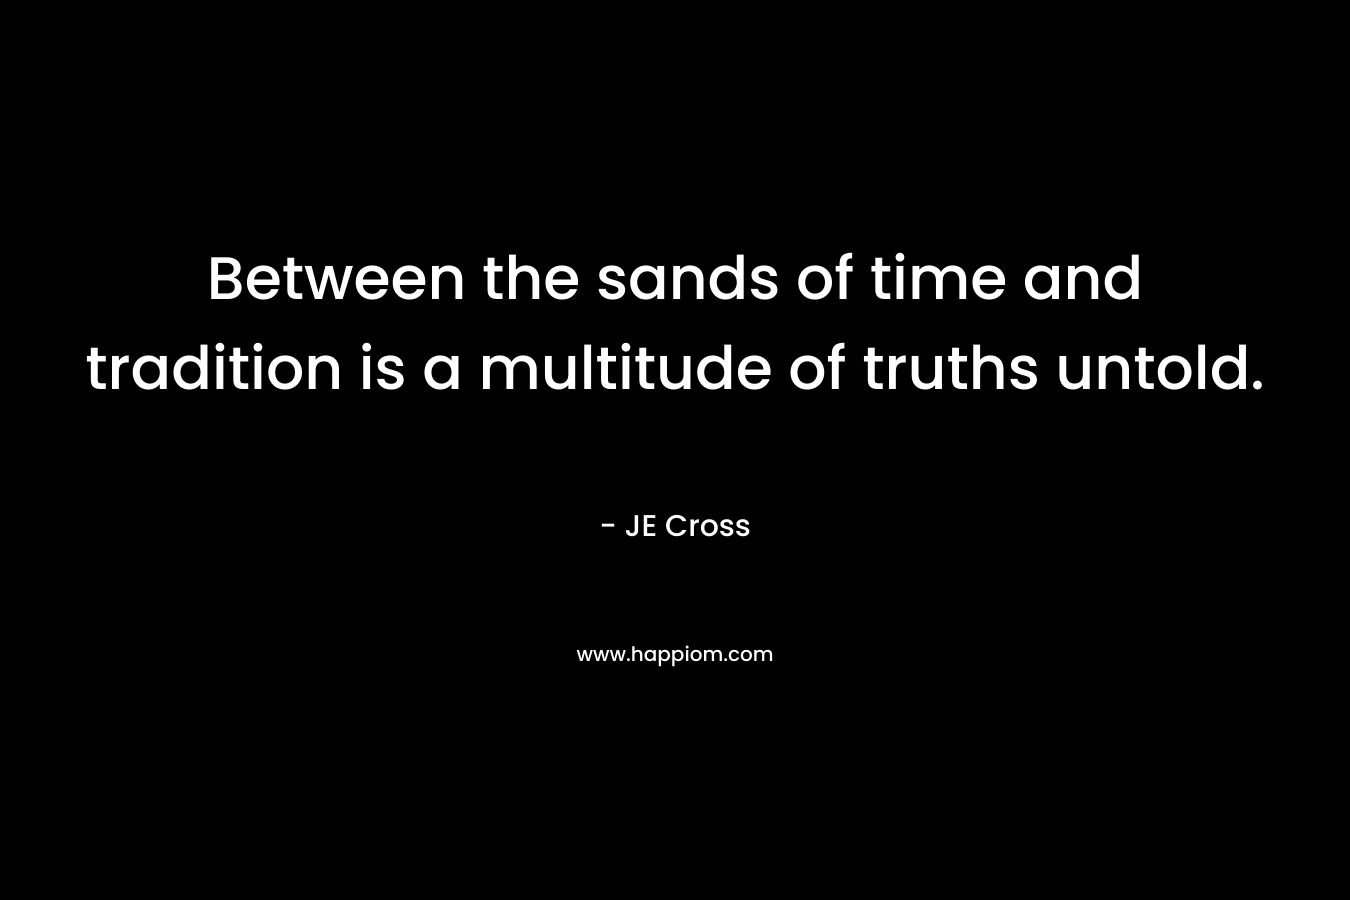 Between the sands of time and tradition is a multitude of truths untold.